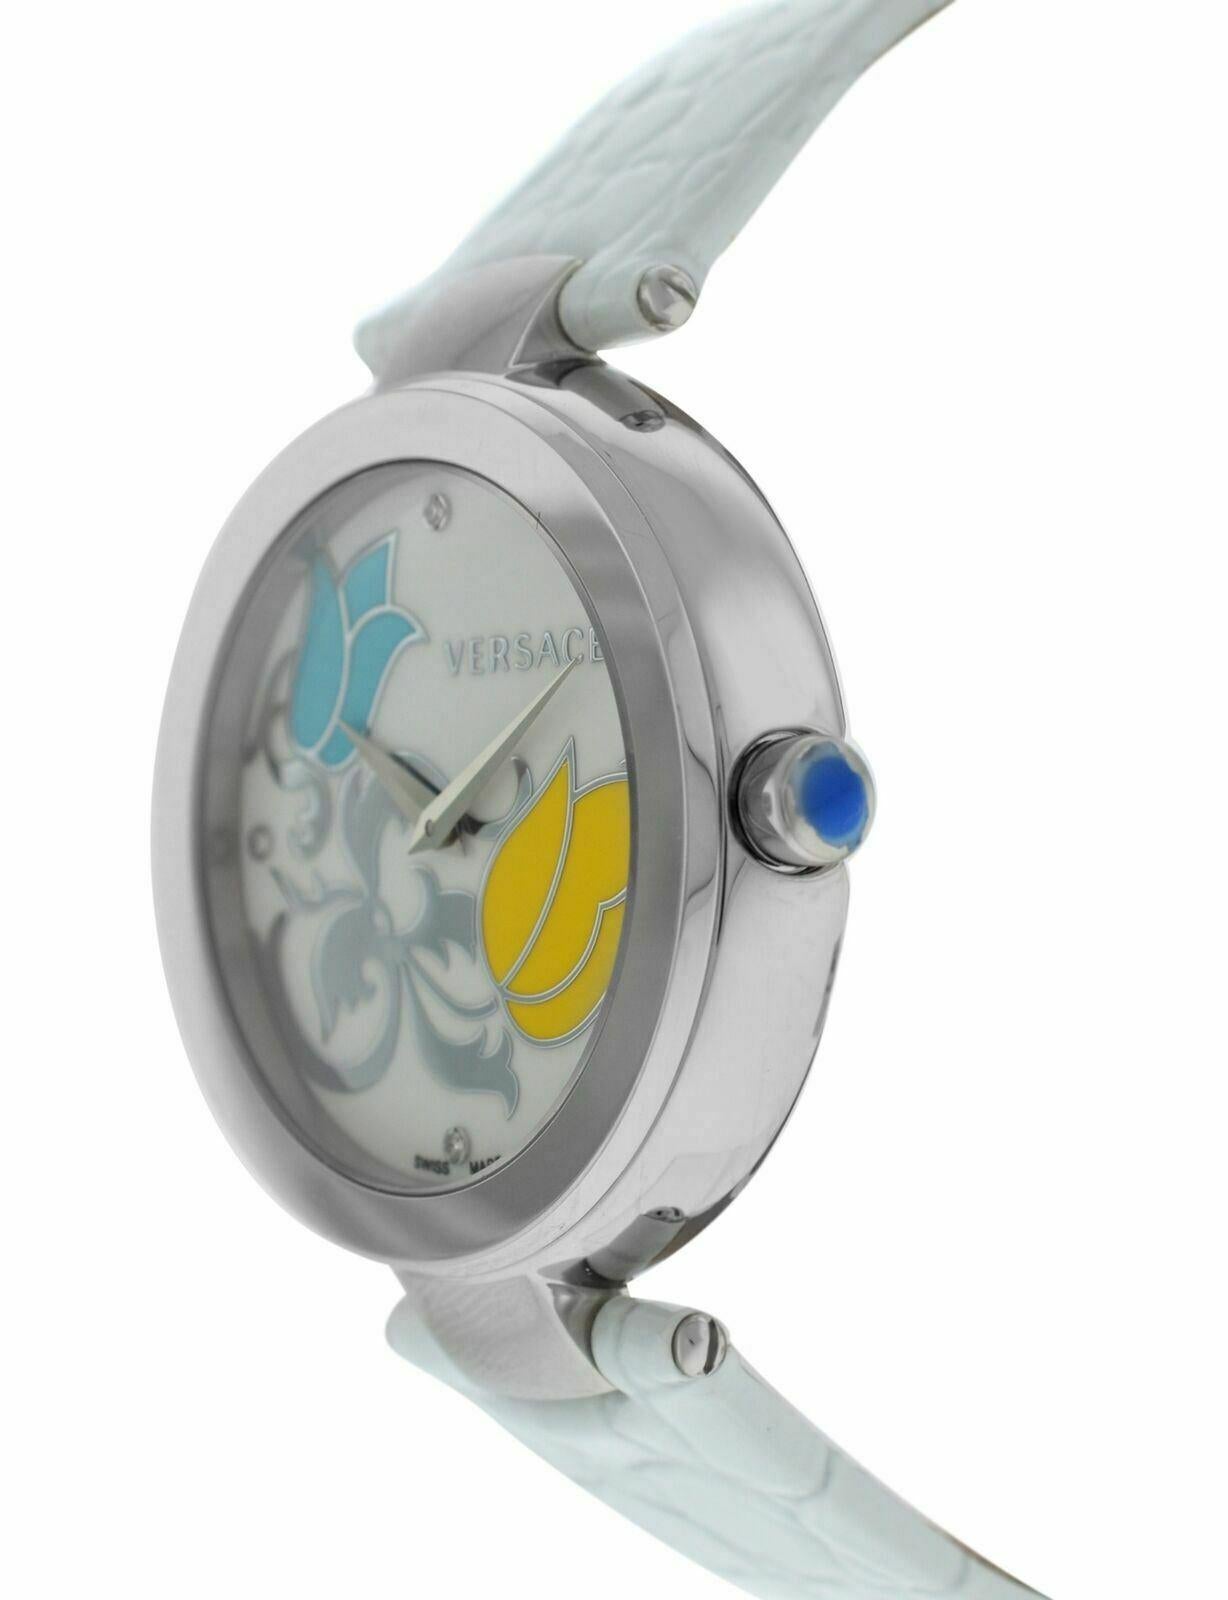 
Brand	Versace
Model	Mystique White Floral I9Q99SD1TU S001
Gender	Ladies
Condition	New
Movement	Swiss Quartz
Case Material	Stainless Steel 
Bracelet / Strap Material	
Genuine Leather

Clasp / Buckle Material	
Stainless Steel

Clasp Type	Butterfly